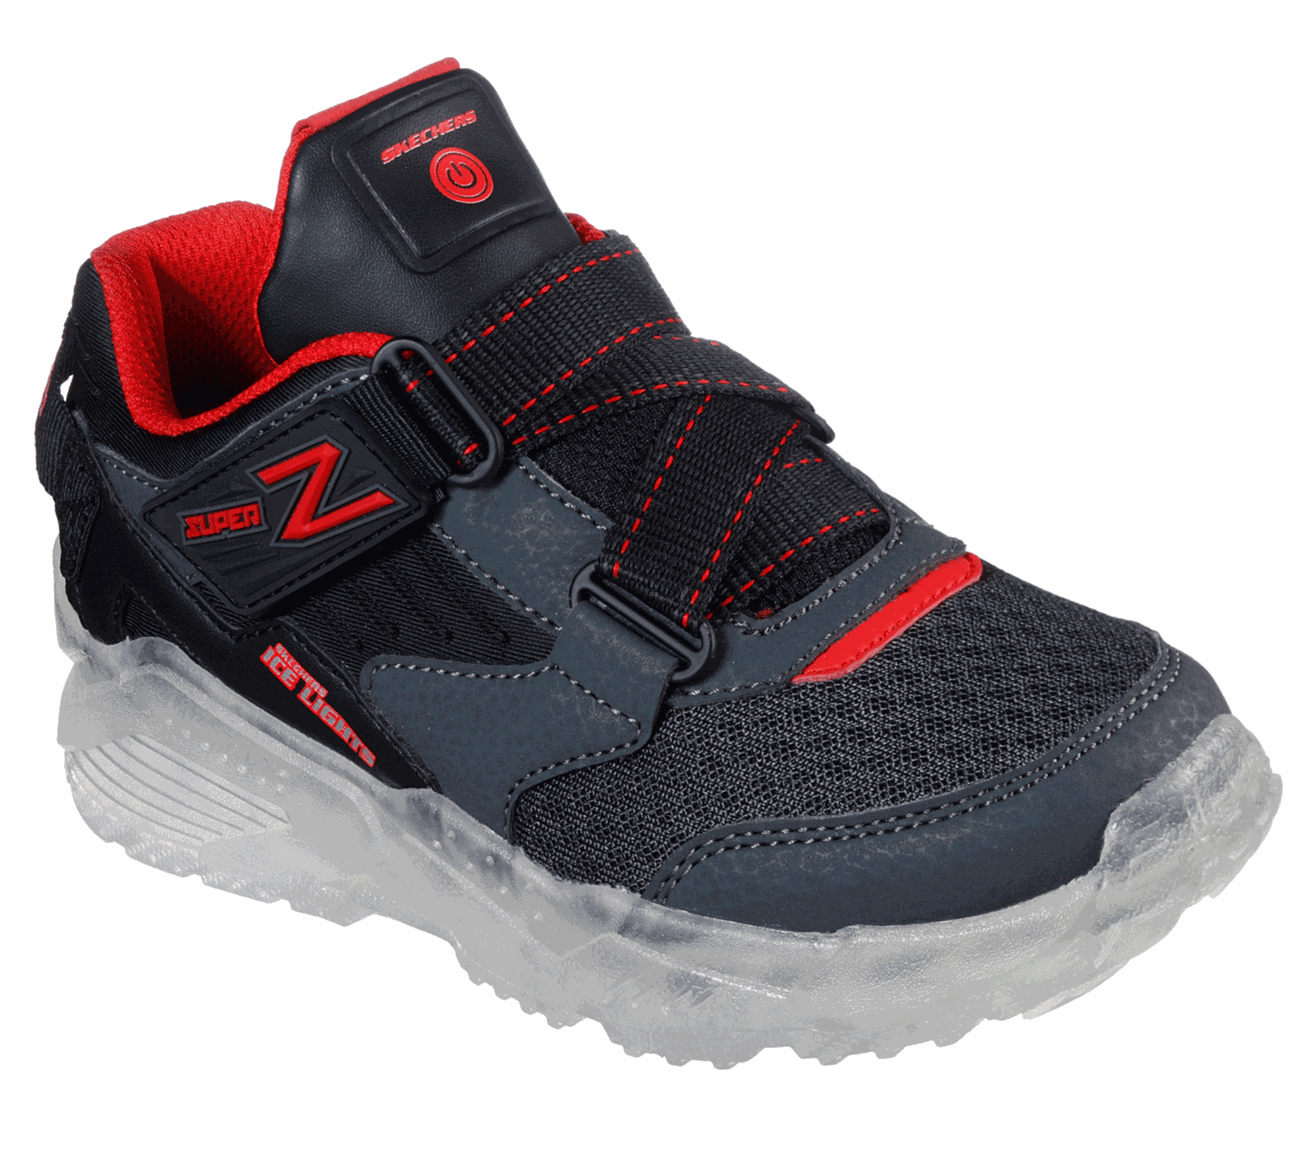 skechers light ups for adults